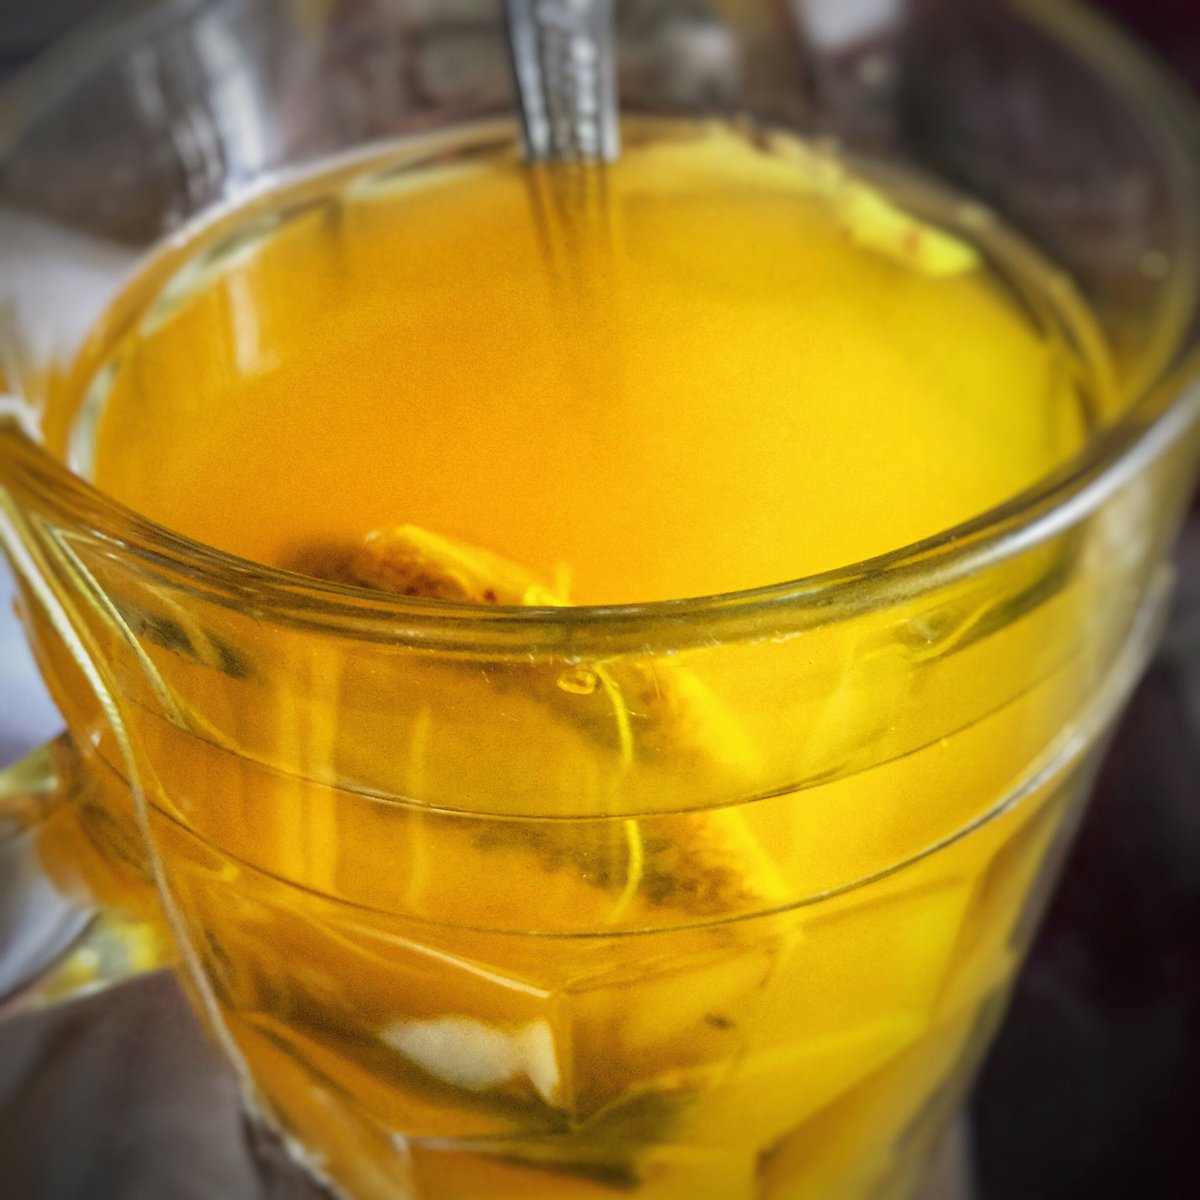 #soothing #freshlybrewed Ginger Lemon Turmeric Tea at #BombsKitchenStudio 🖤🍃🍋🍵💛 
#mindfulness #dailypractice #addiction #BombsTherapy 

#antiinflammatory #drink #vegan #healthy #nutrition #nature #holistic #calming #spice #naturaldrink #homemade #grateful